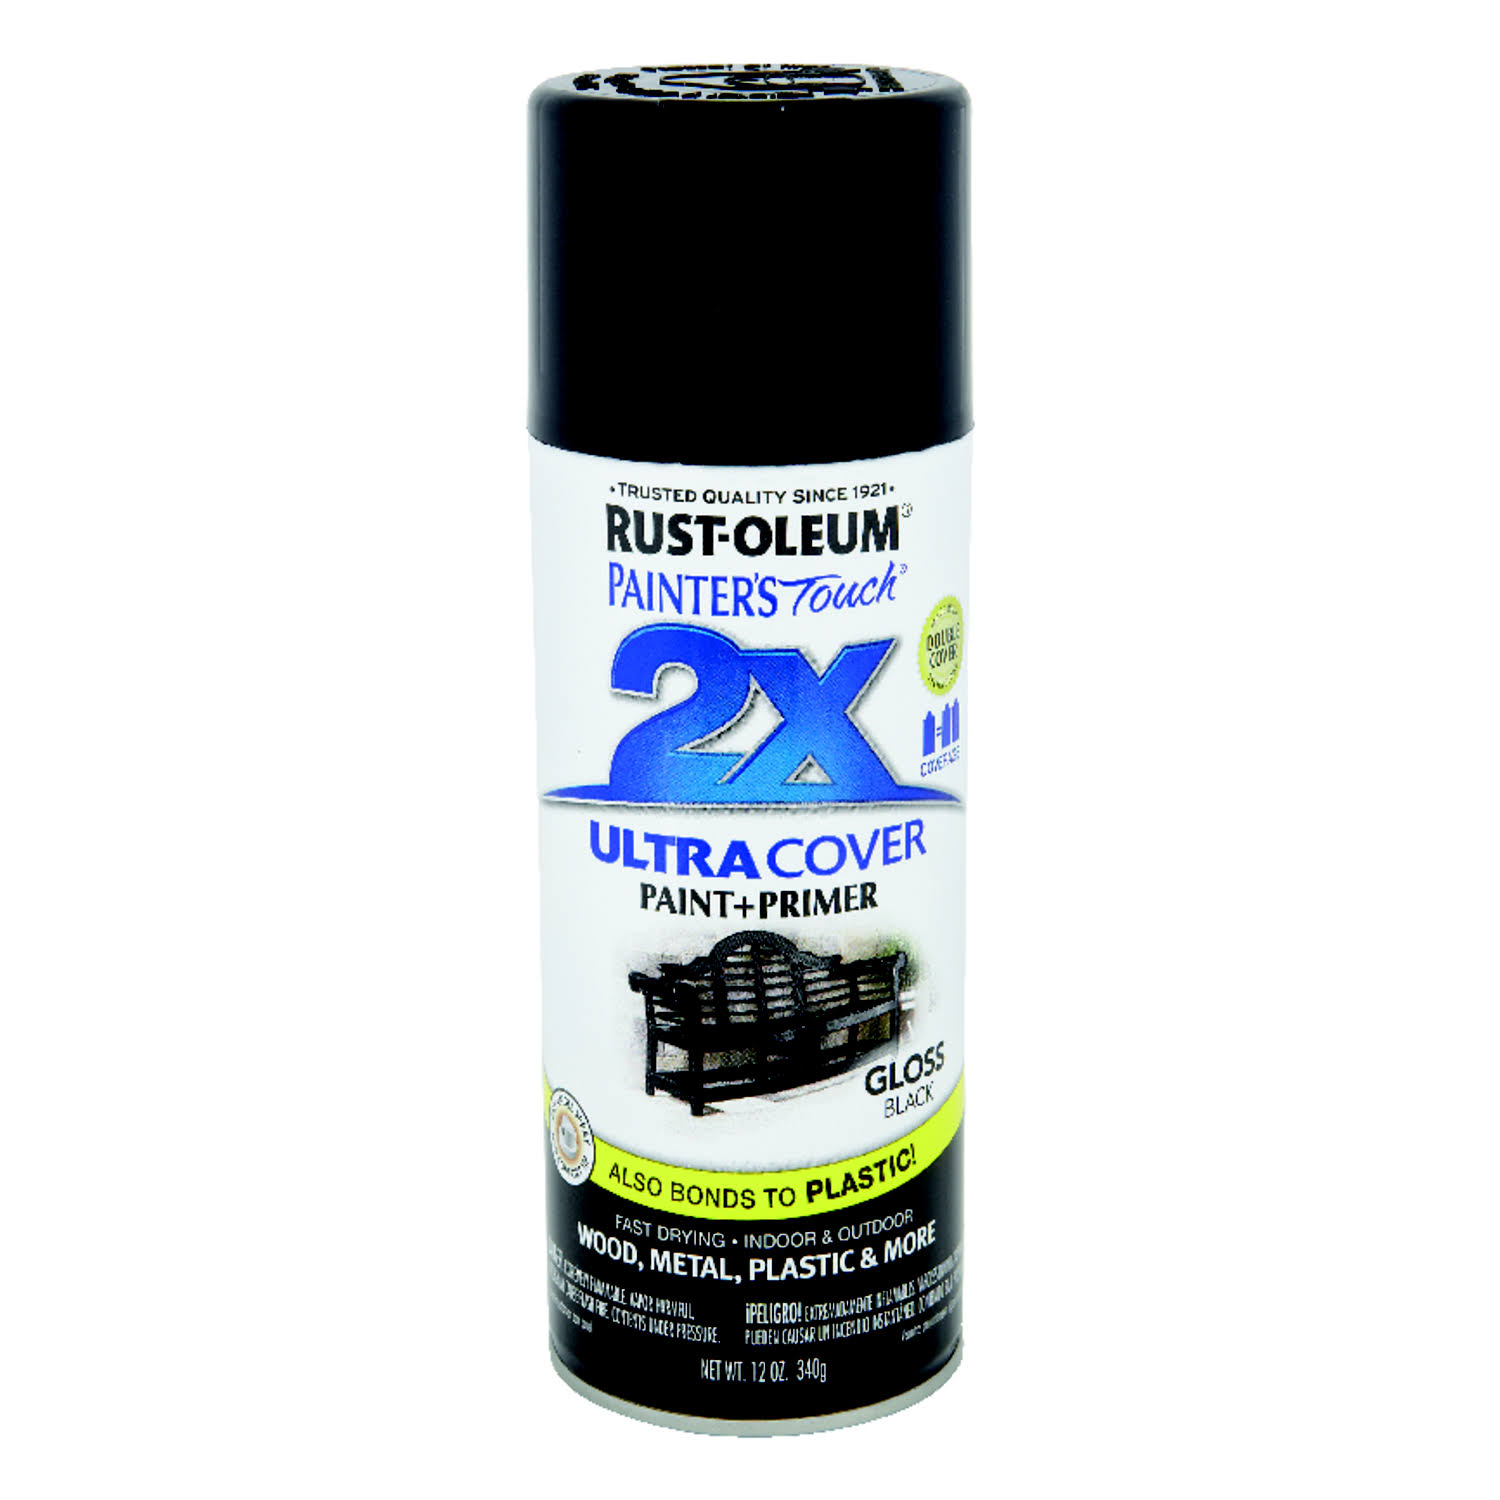 Rust-Oleum 249122 Painter's Touch 2x Ultra Cover, 12 Ounce (Pack of 1), Gloss Black